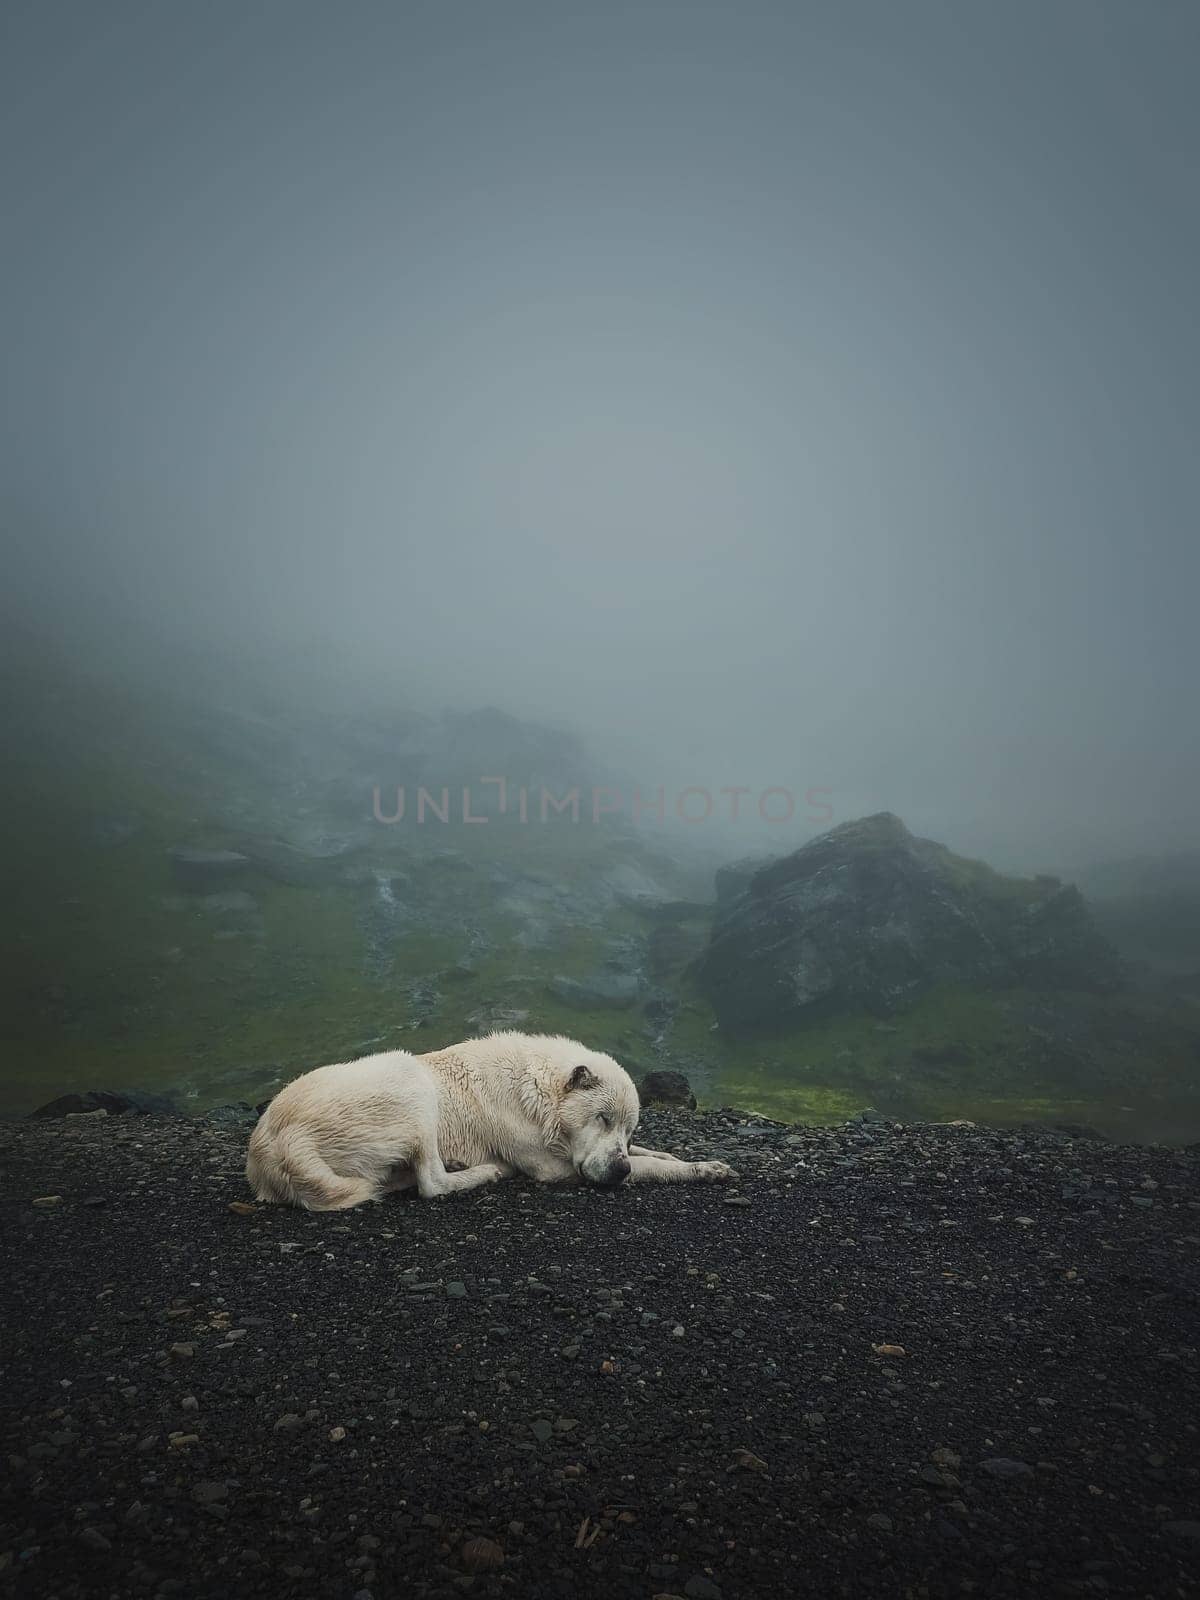 Moody and silent scene with a white, wolf like dog sleeping outdoors on the top of Transfagarasan mountain. Big shepherd hound in romania Carpathians, resting near the misty hills